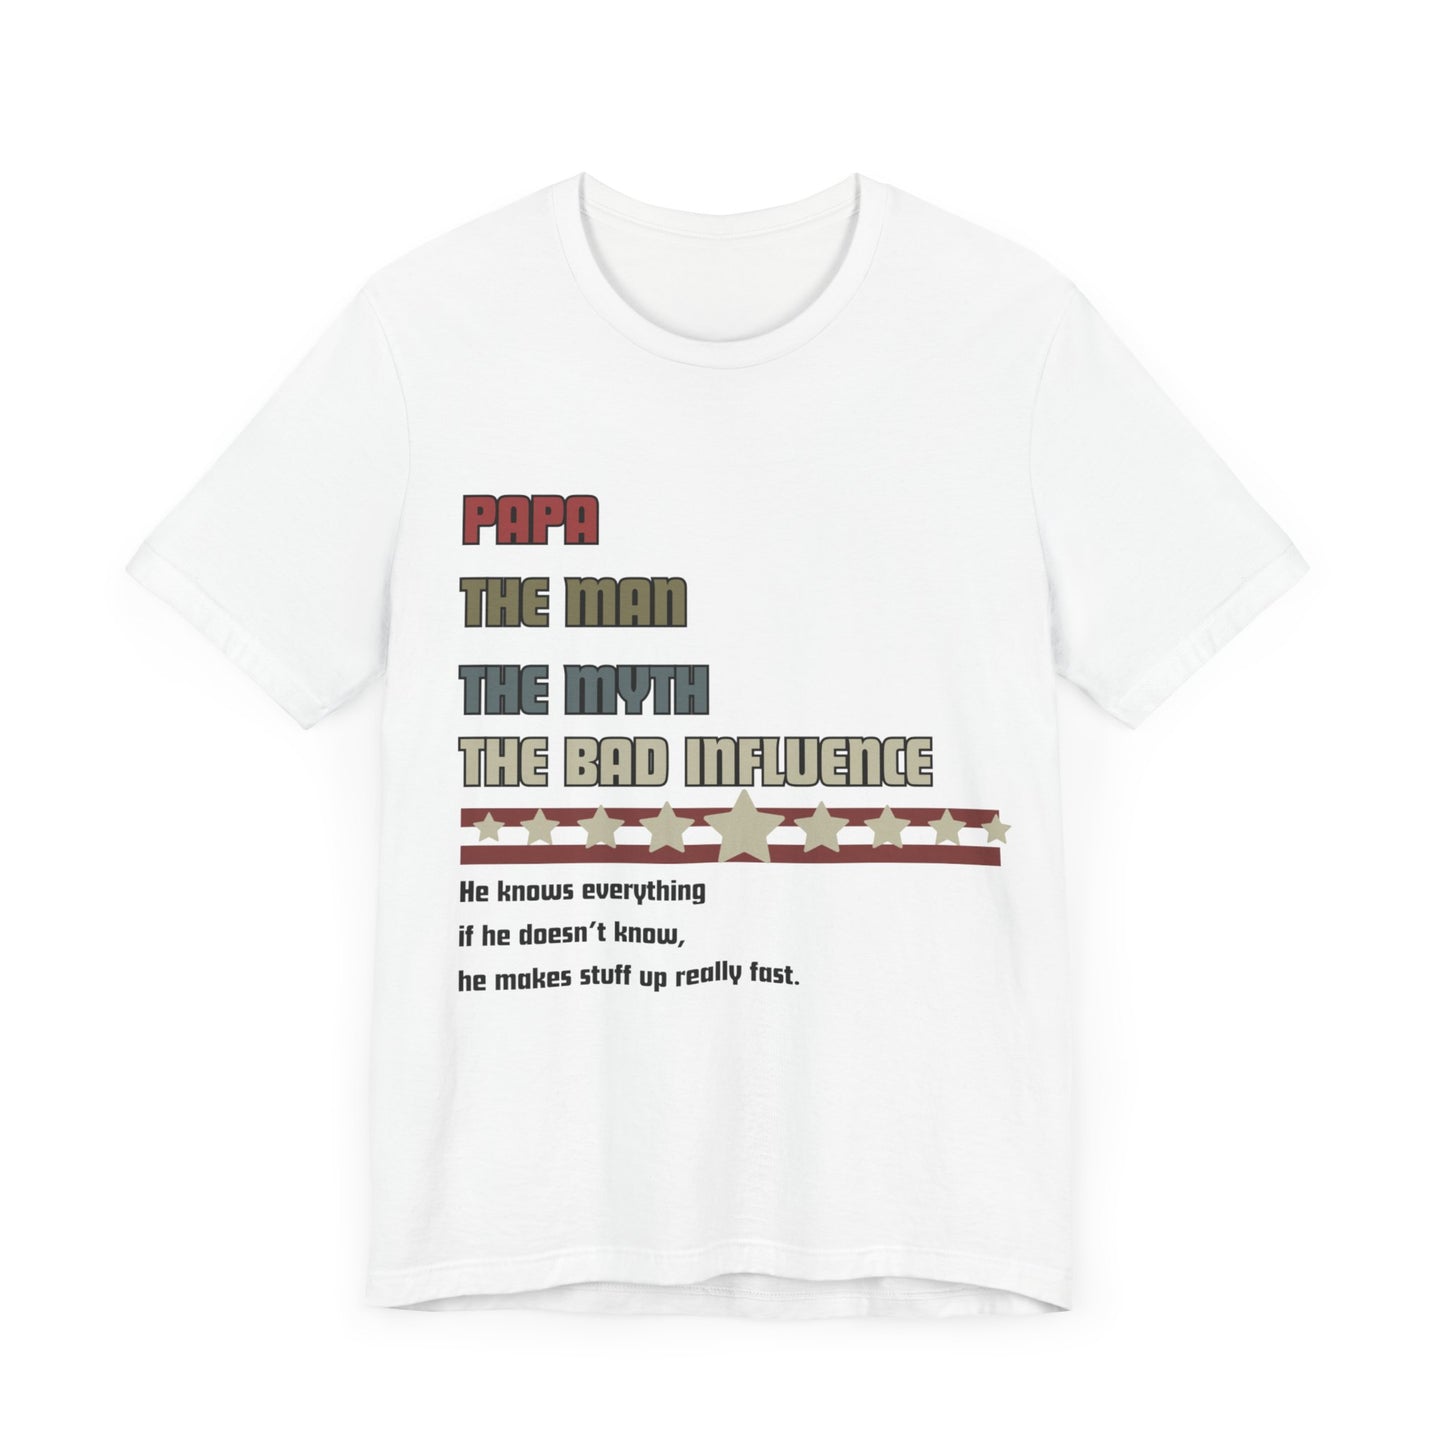 Papa t-shirt/Father's Day